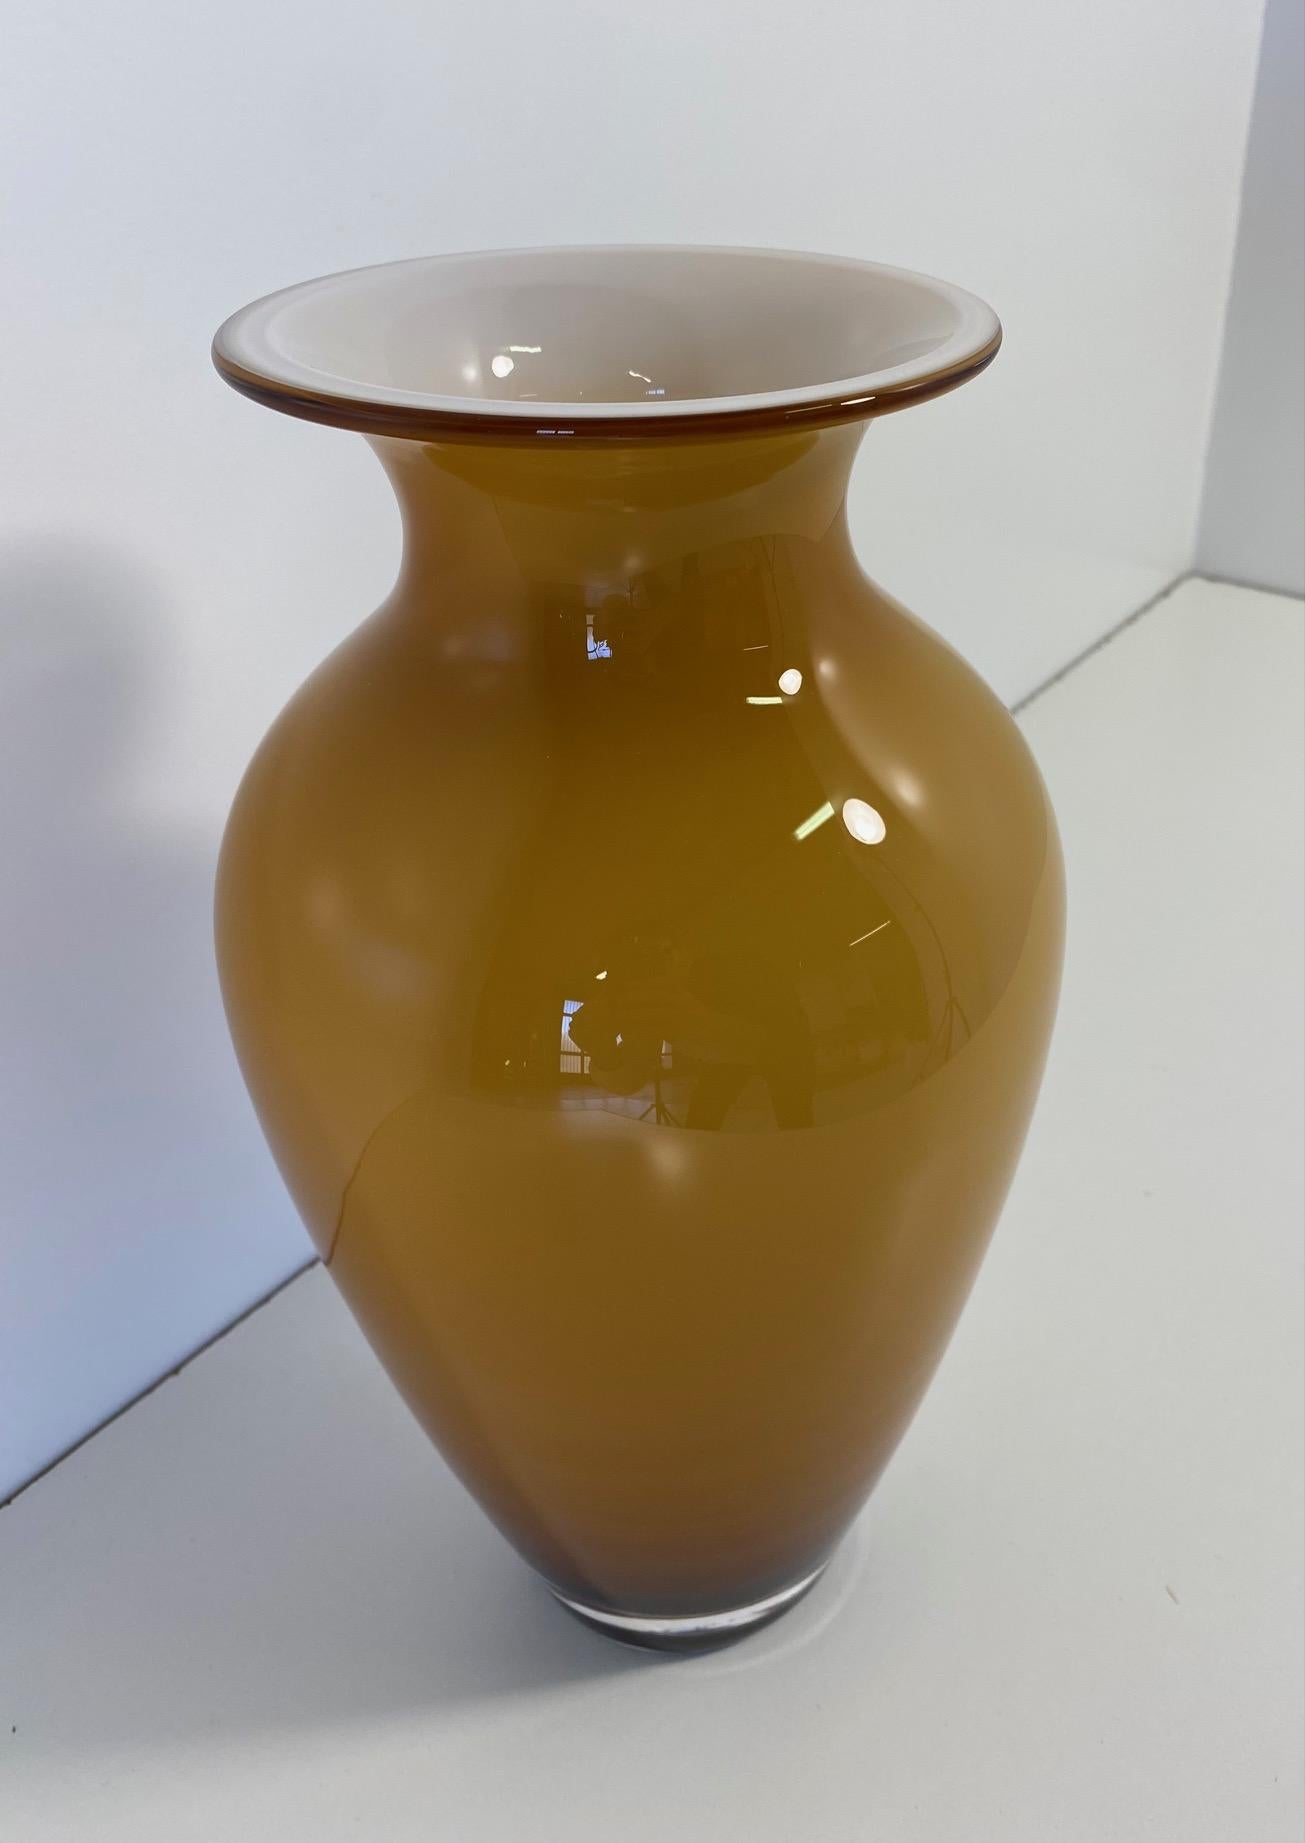 Blown and encased glass vase (amber yellow exterior and milky white interior) with opal glass layer. 

The nuance of the amber yellow color is very particular.

Stamped 'Nason C.' (Carlo Nason) under the base.